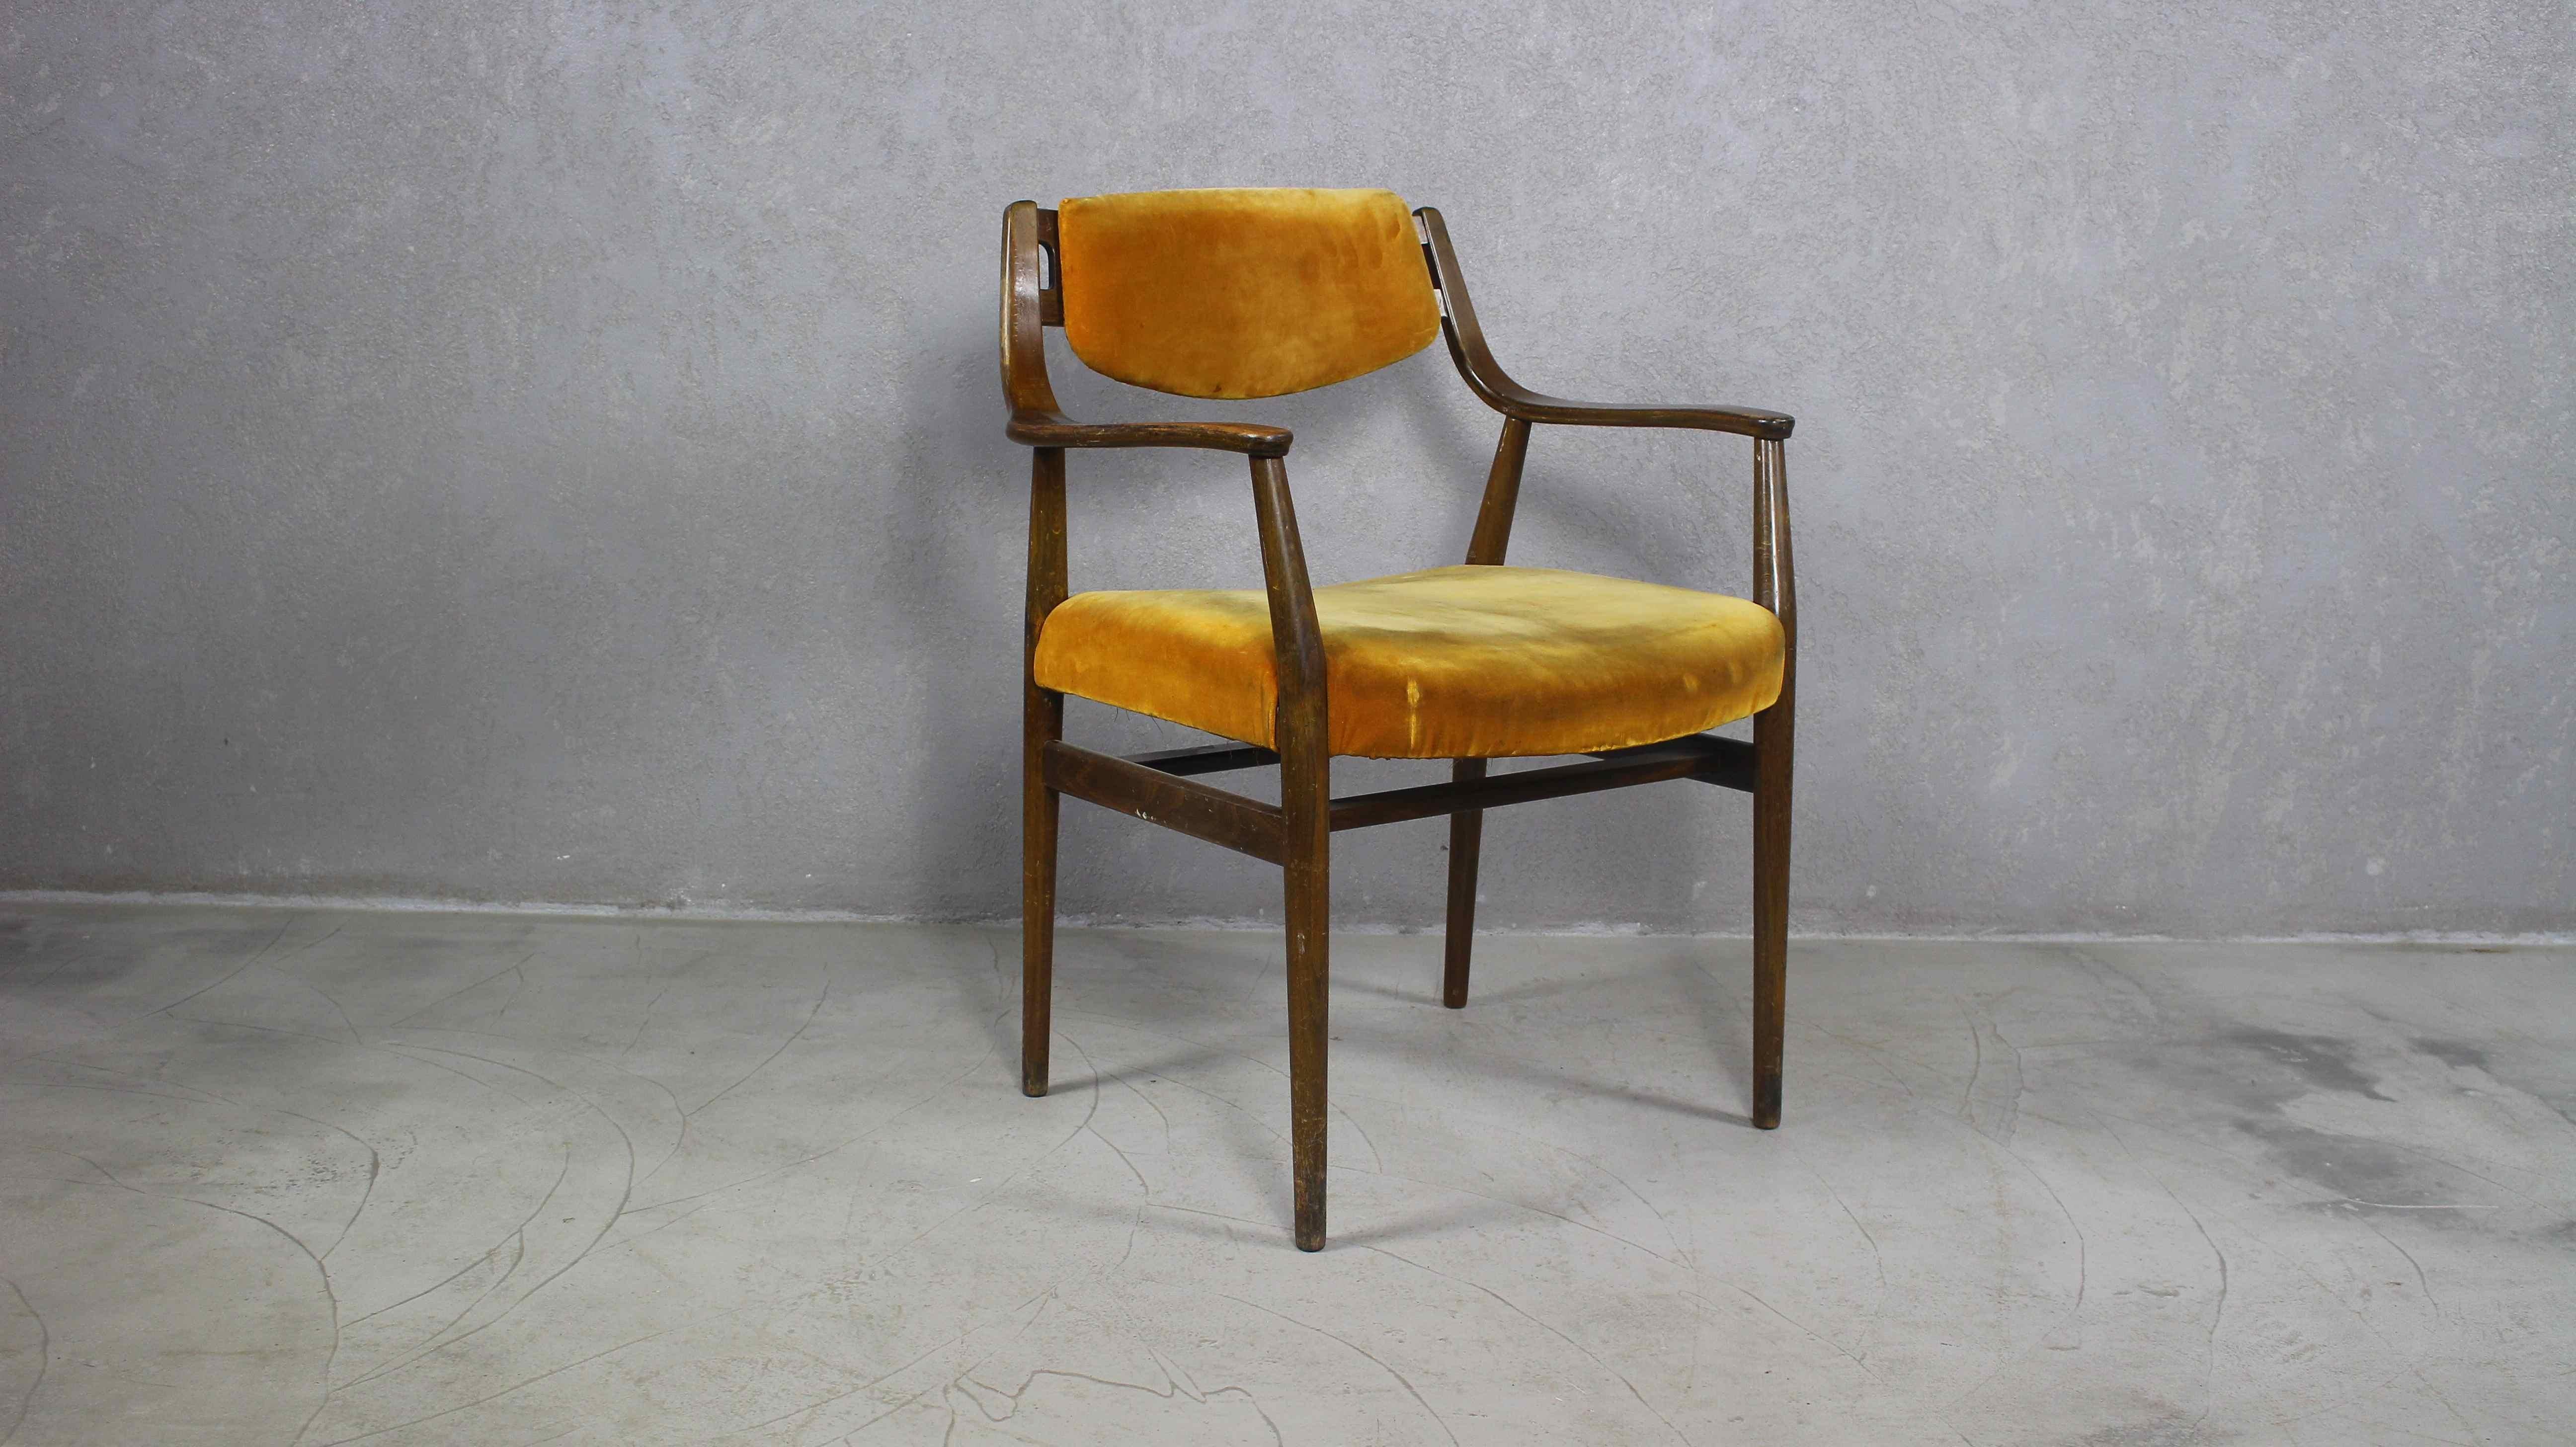 Vintage Danish wooden armchair from 1960s.
Elegant and sculptural Danish Mid-Century Modern armchair in solid wood. Round tapered legs. Flared armrests.
Very suitable as a desk chair
Similar design and details is known from Finn Juhl and Hans